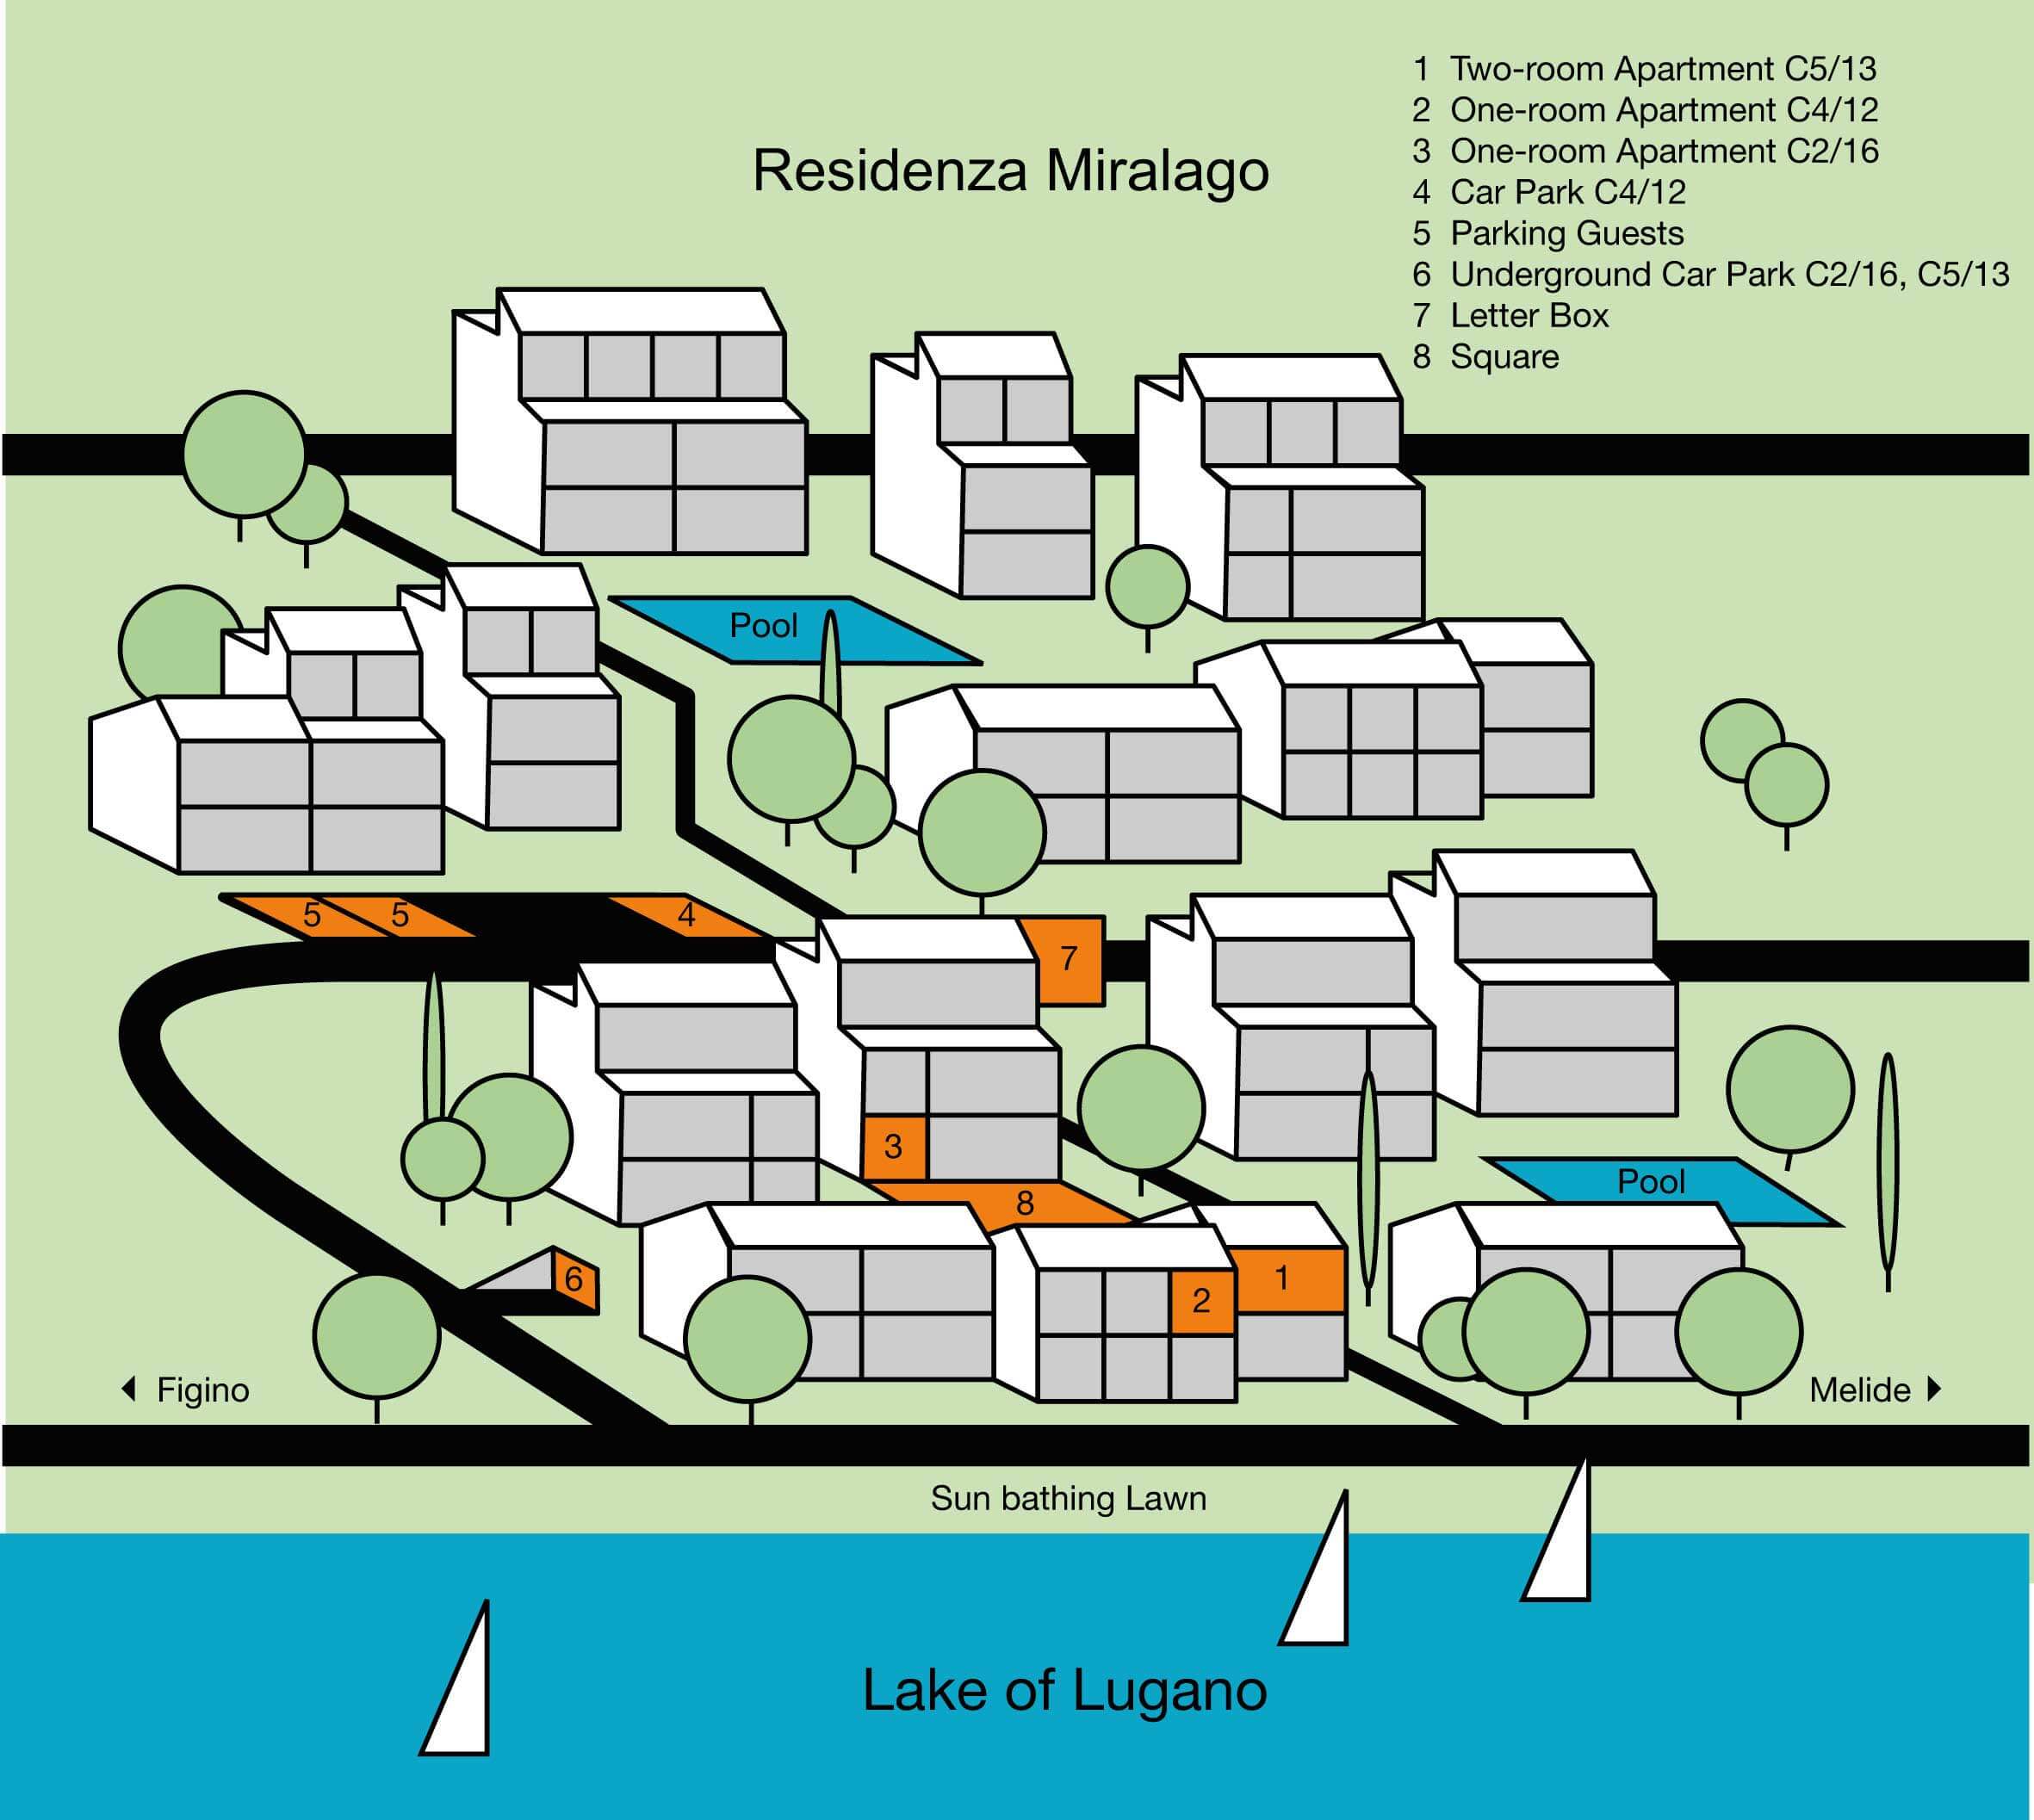 This map shows an overview of the Residenza Miralago